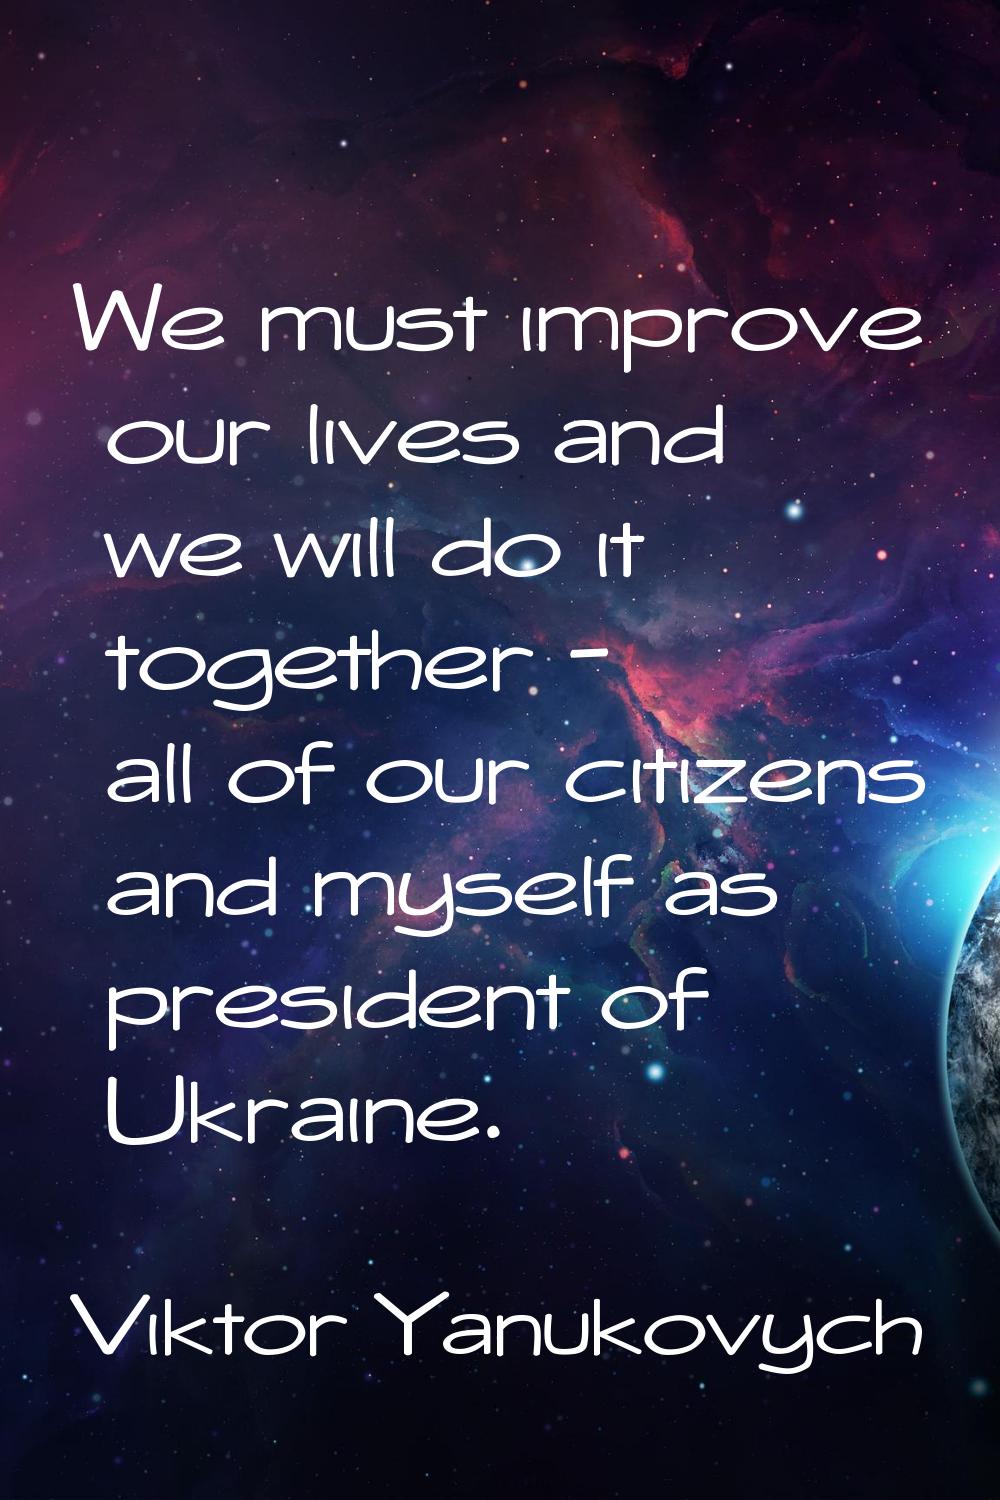 We must improve our lives and we will do it together - all of our citizens and myself as president 